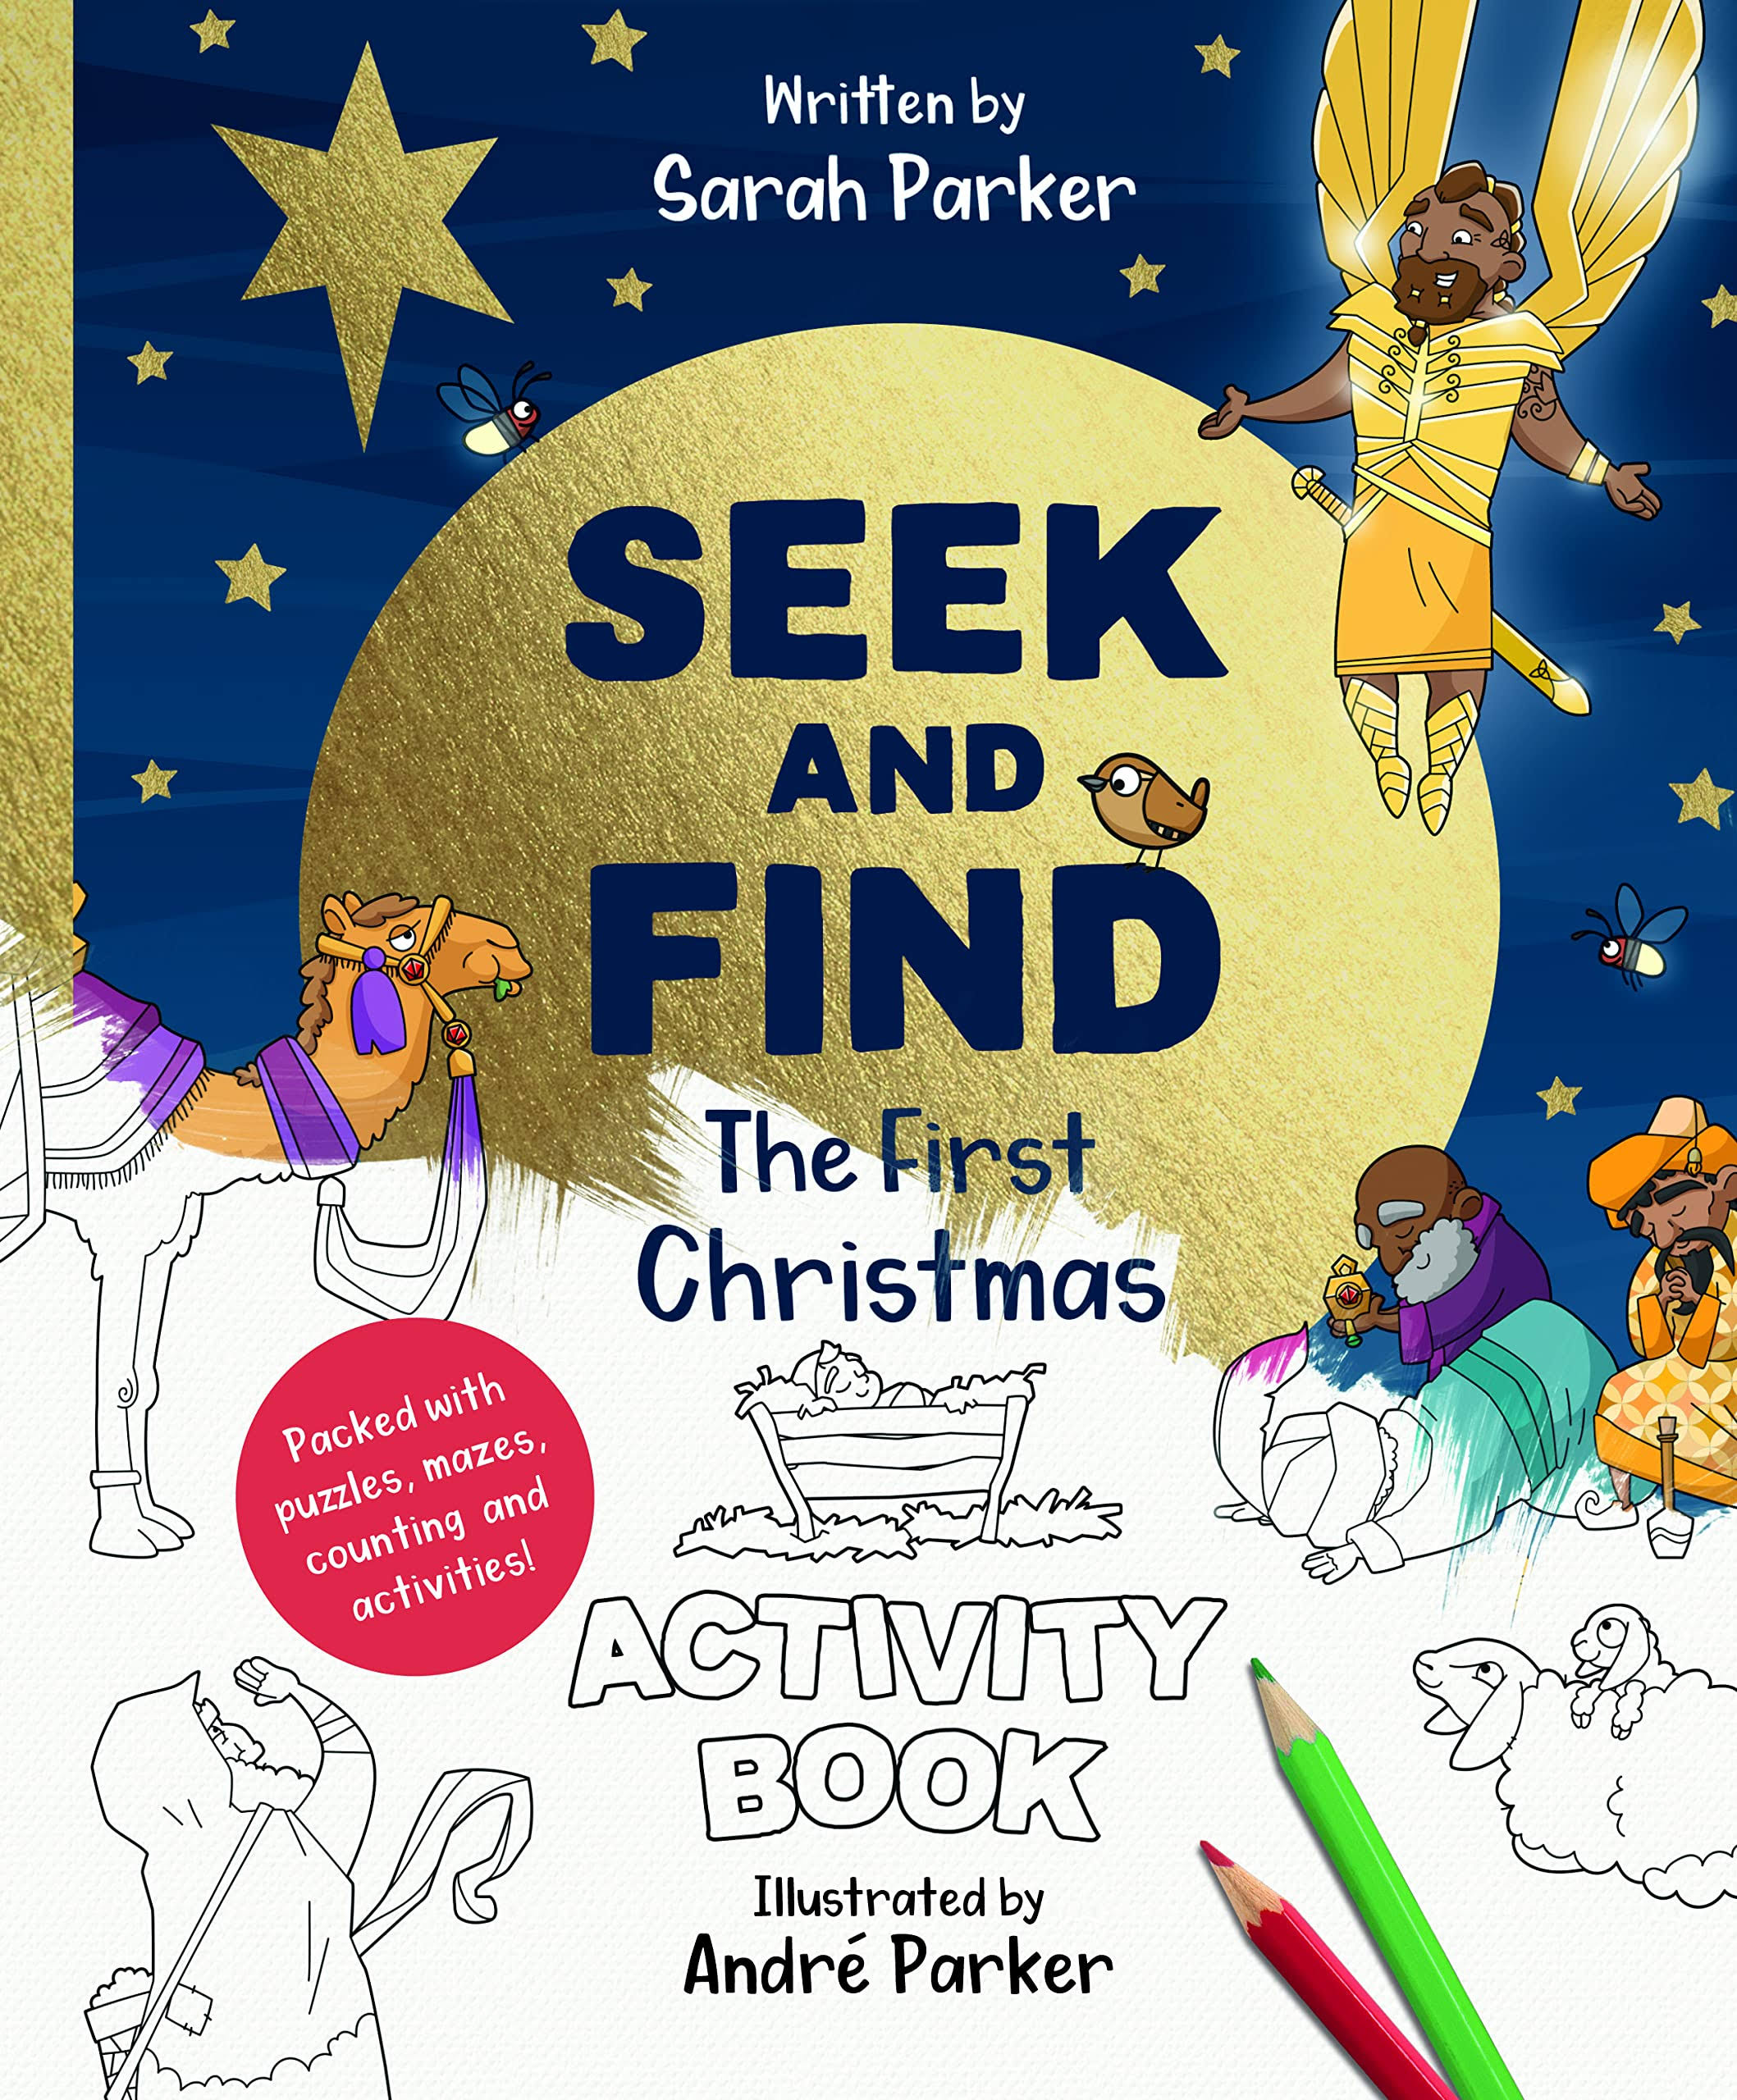 Seek and Find: The First Christmas Activity Book by Sarah Parker